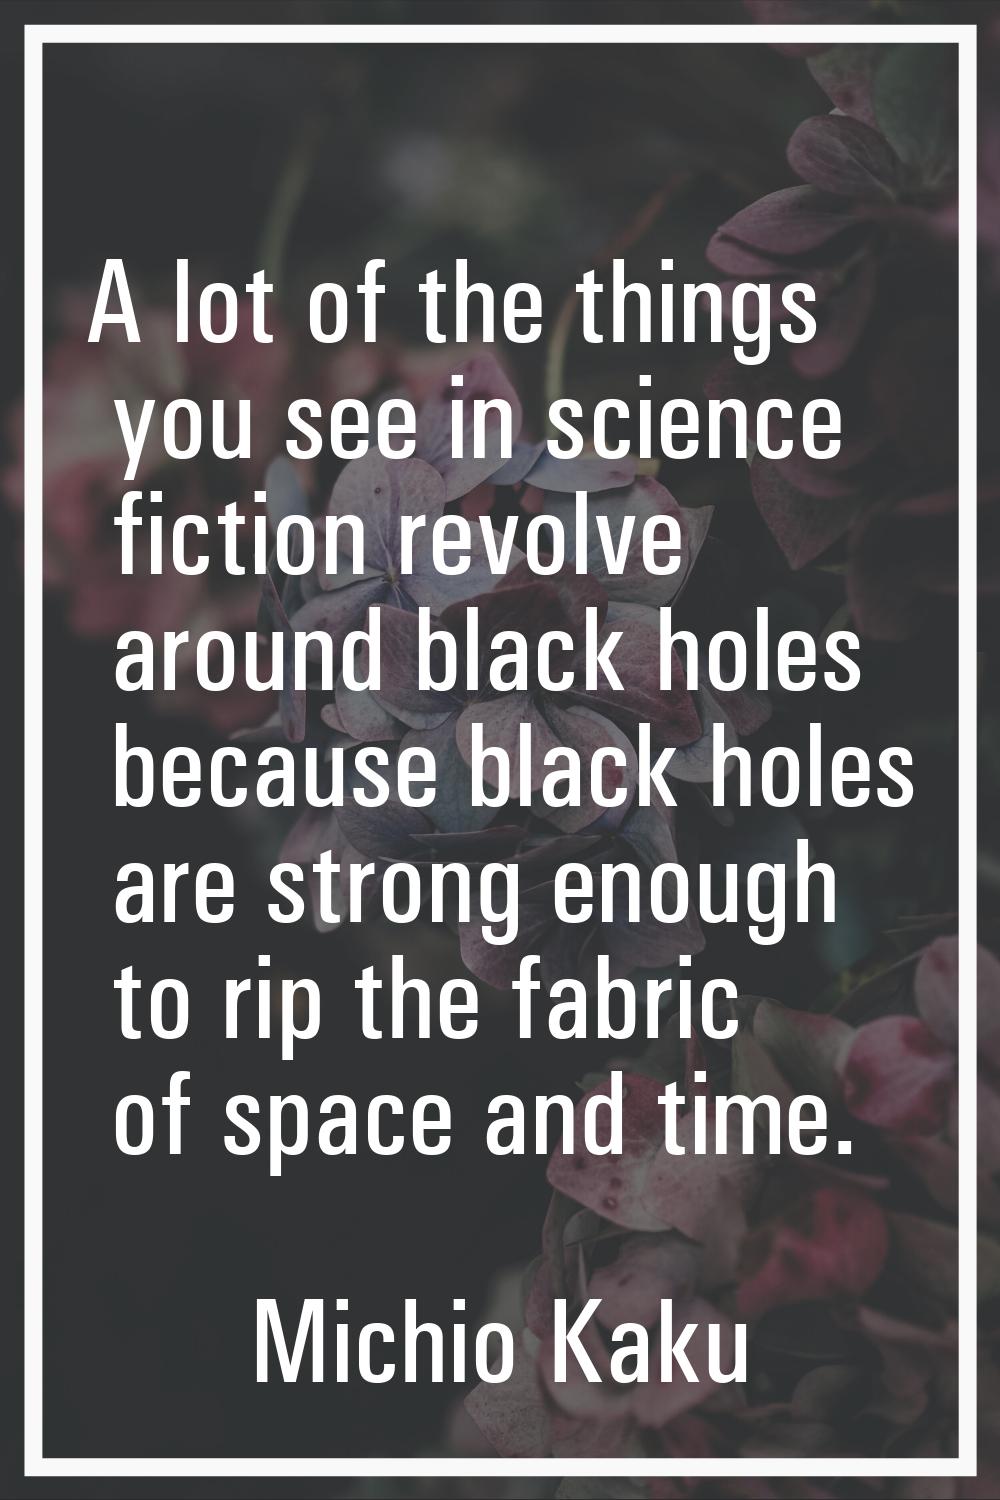 A lot of the things you see in science fiction revolve around black holes because black holes are s